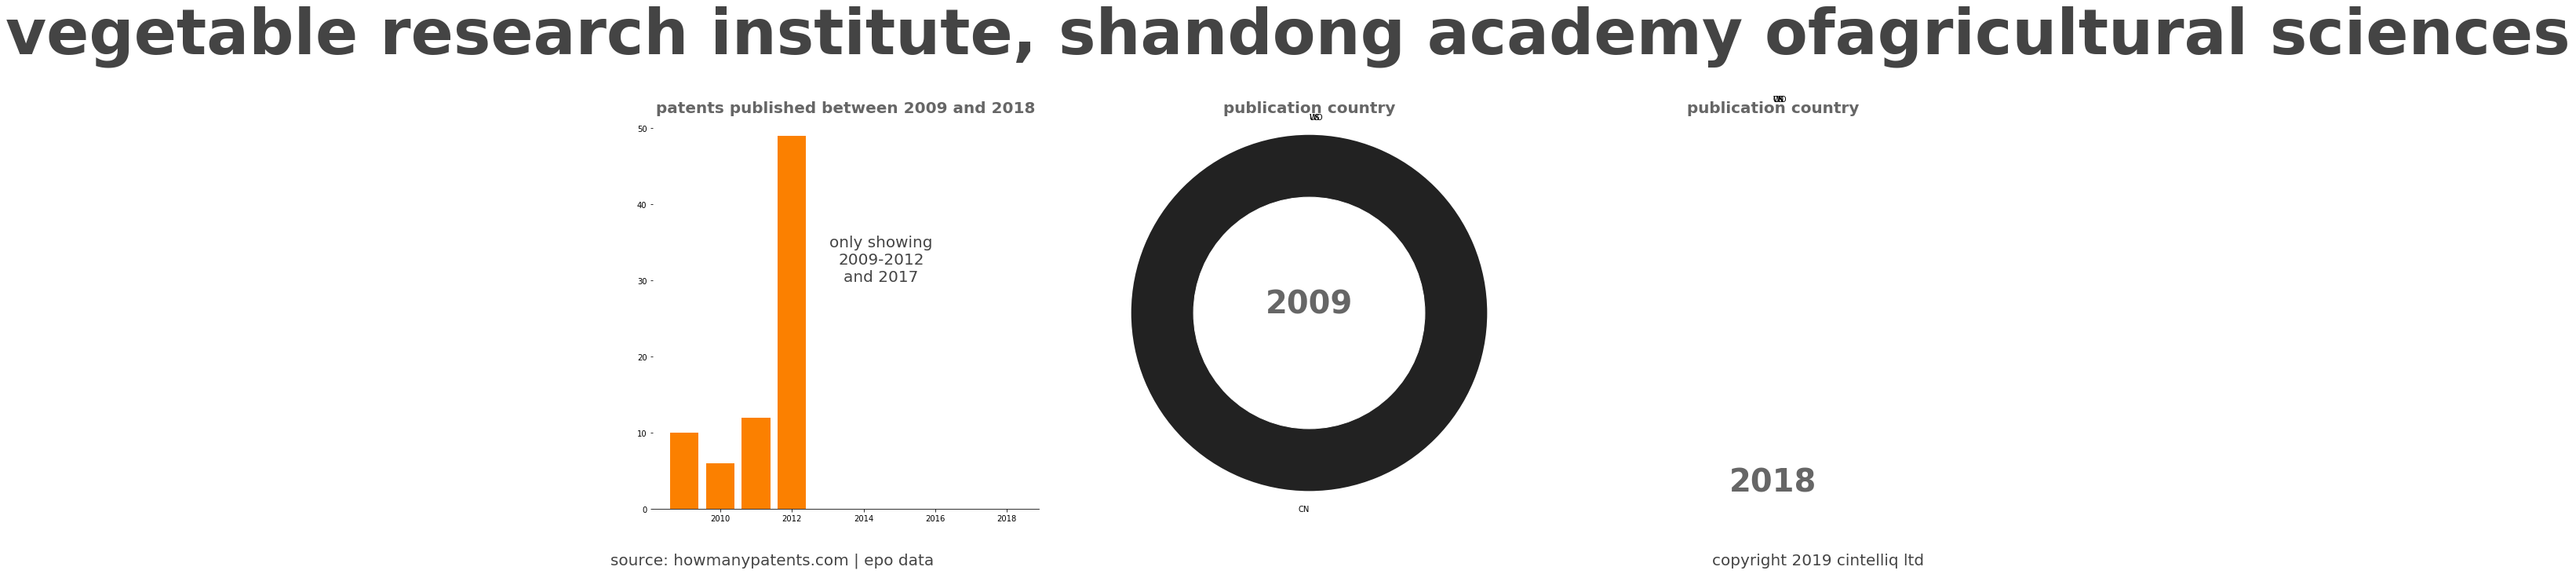 summary of patents for Vegetable Research Institute, Shandong Academy Ofagricultural Sciences